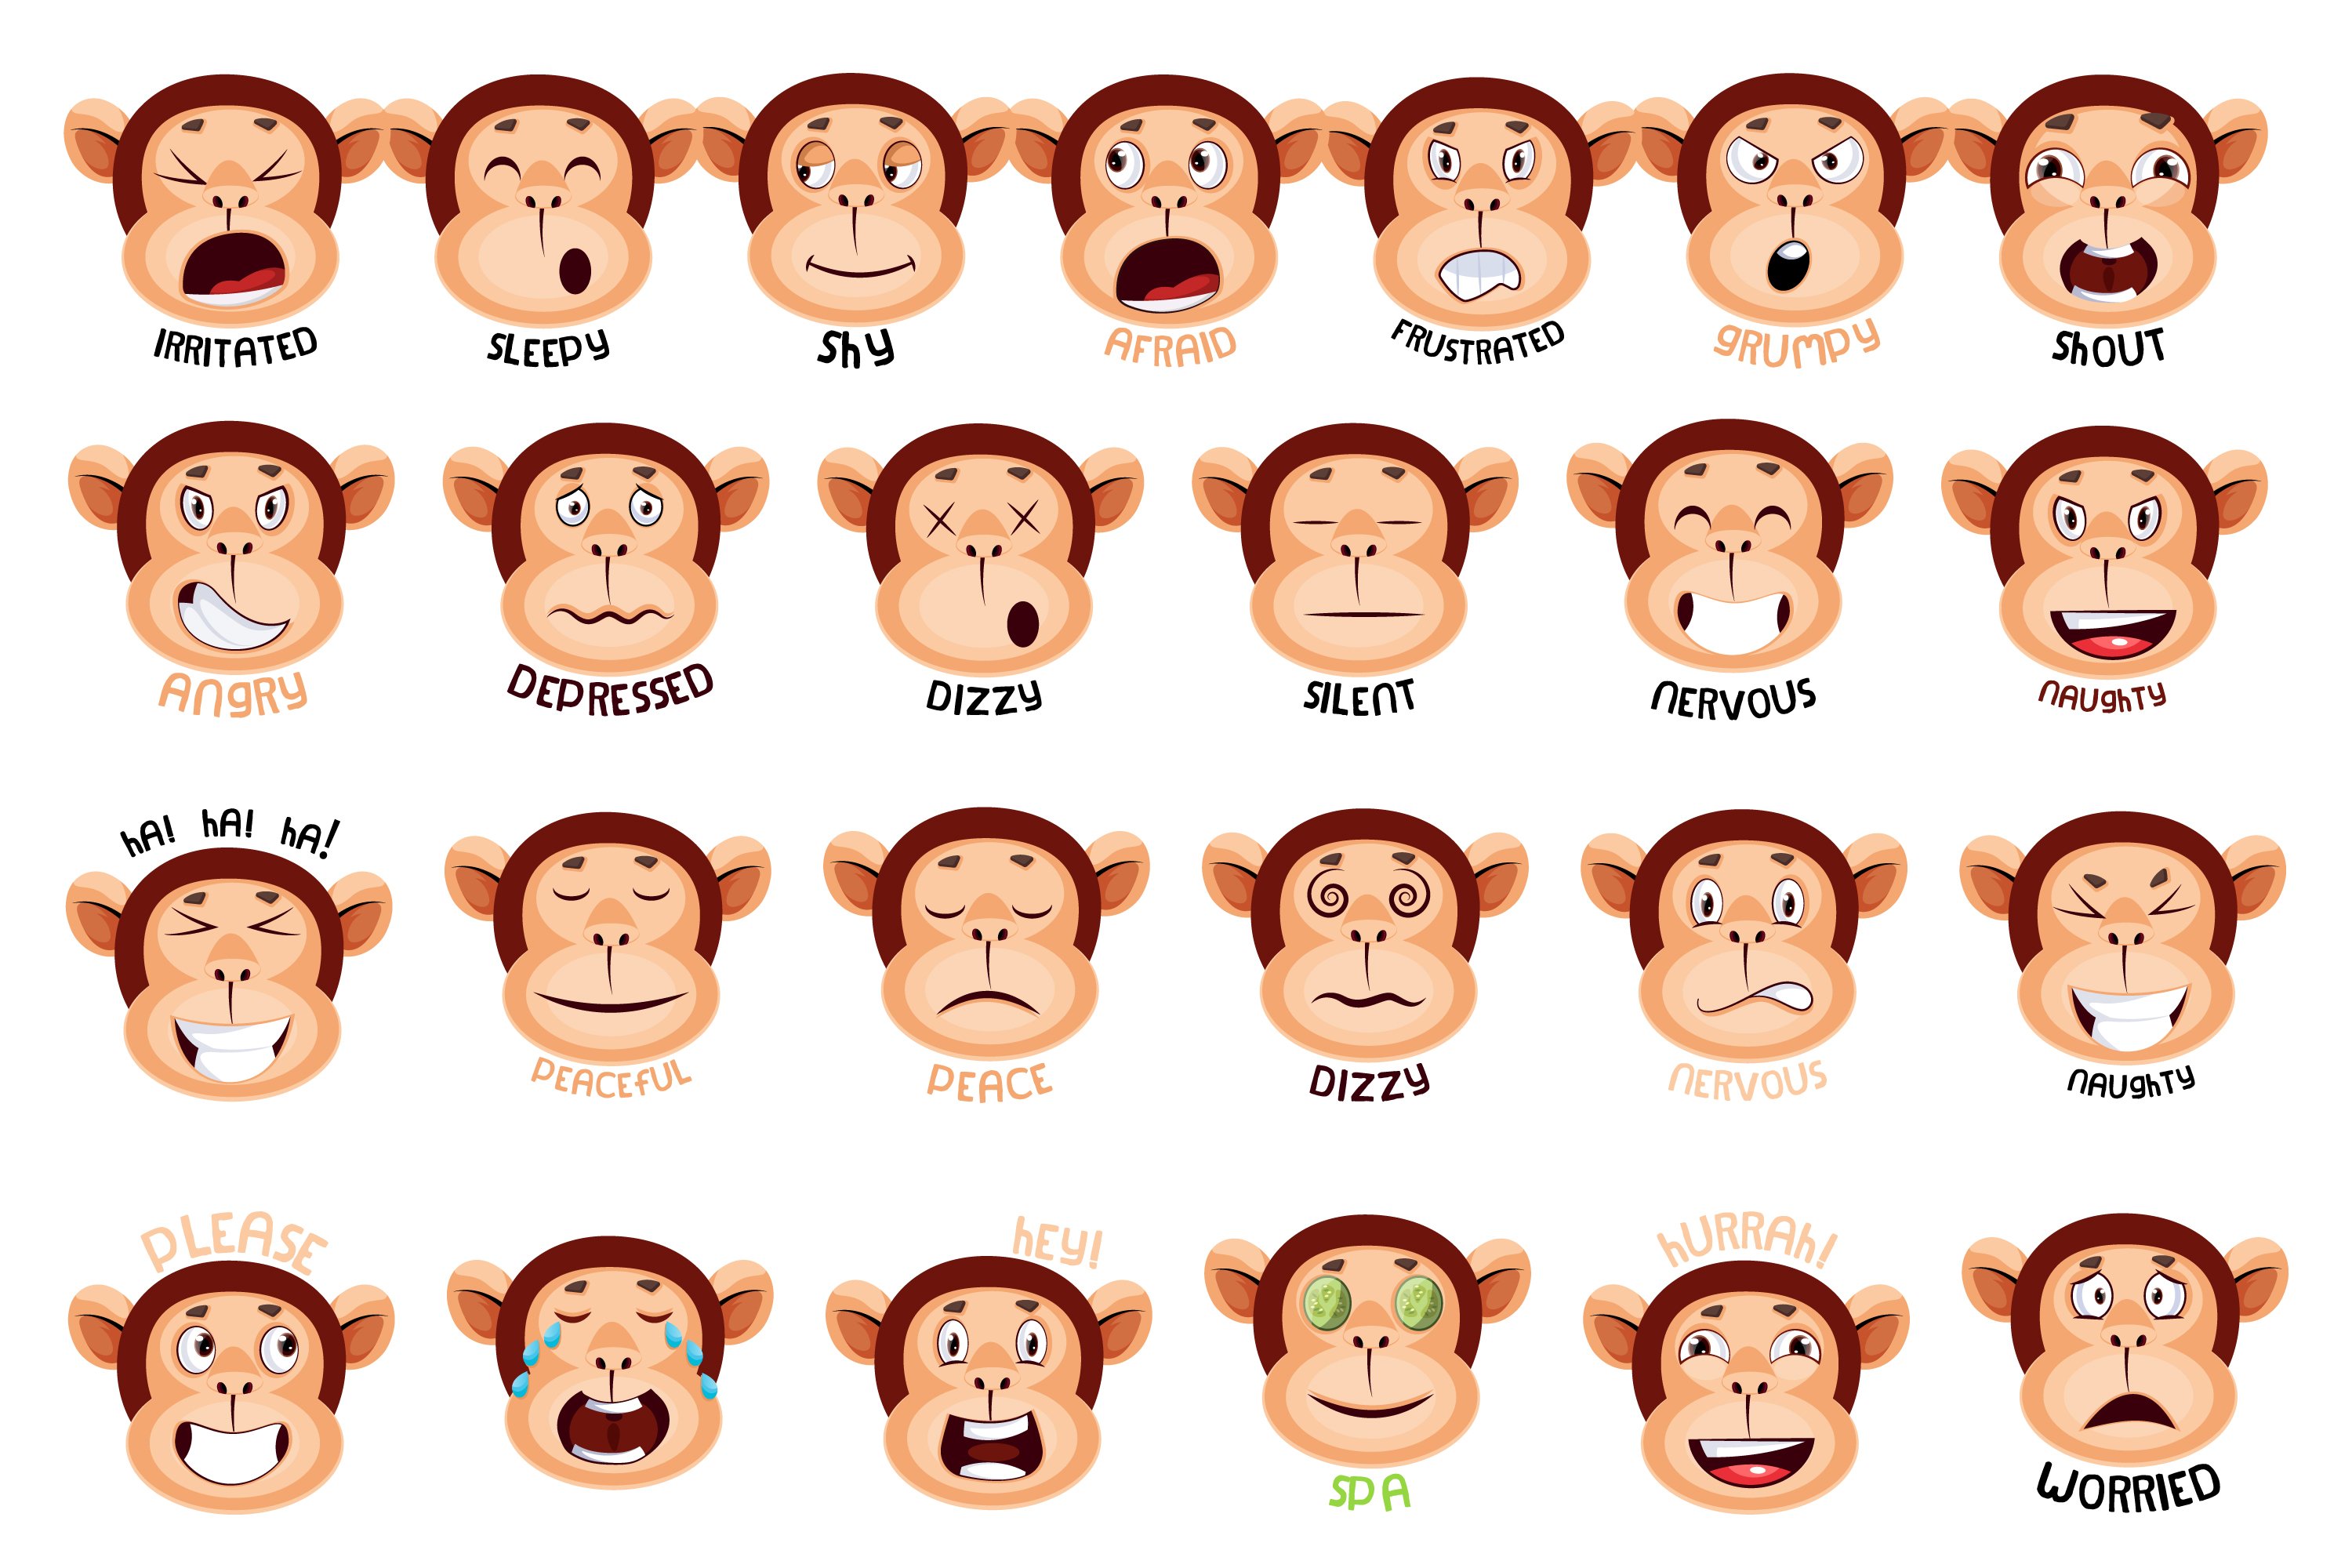 Various facial expressions and objects of the monkey.